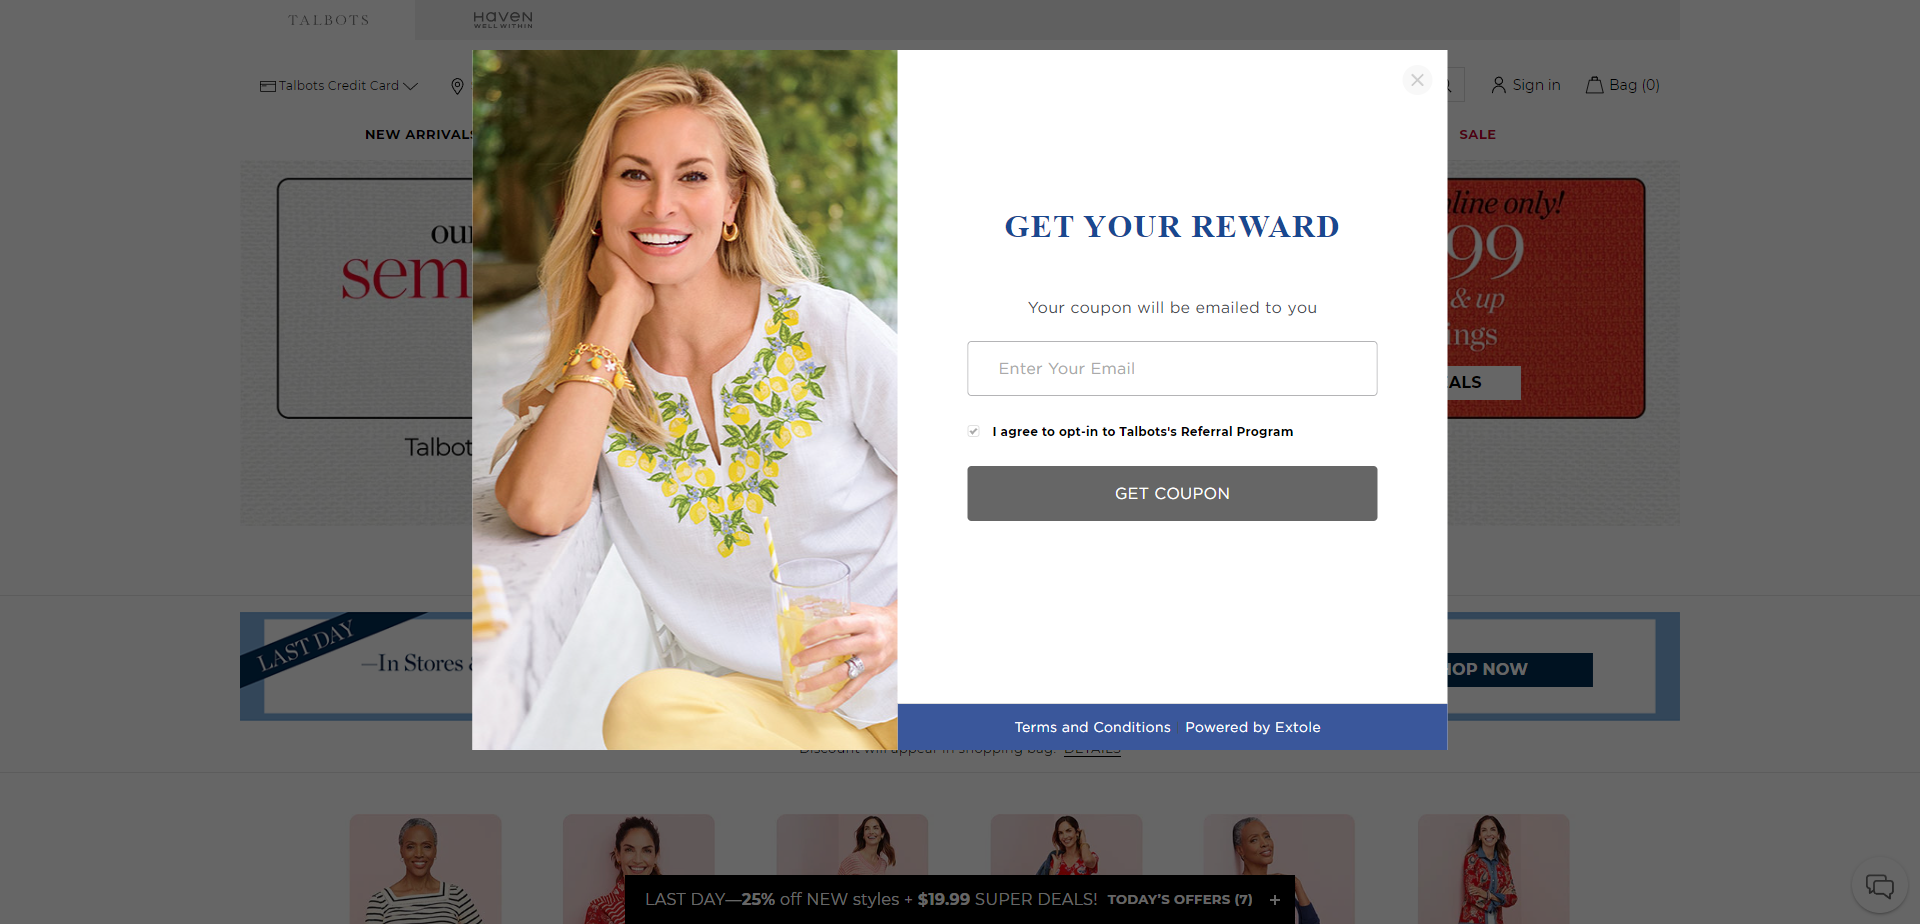 Landing Page for Talbots